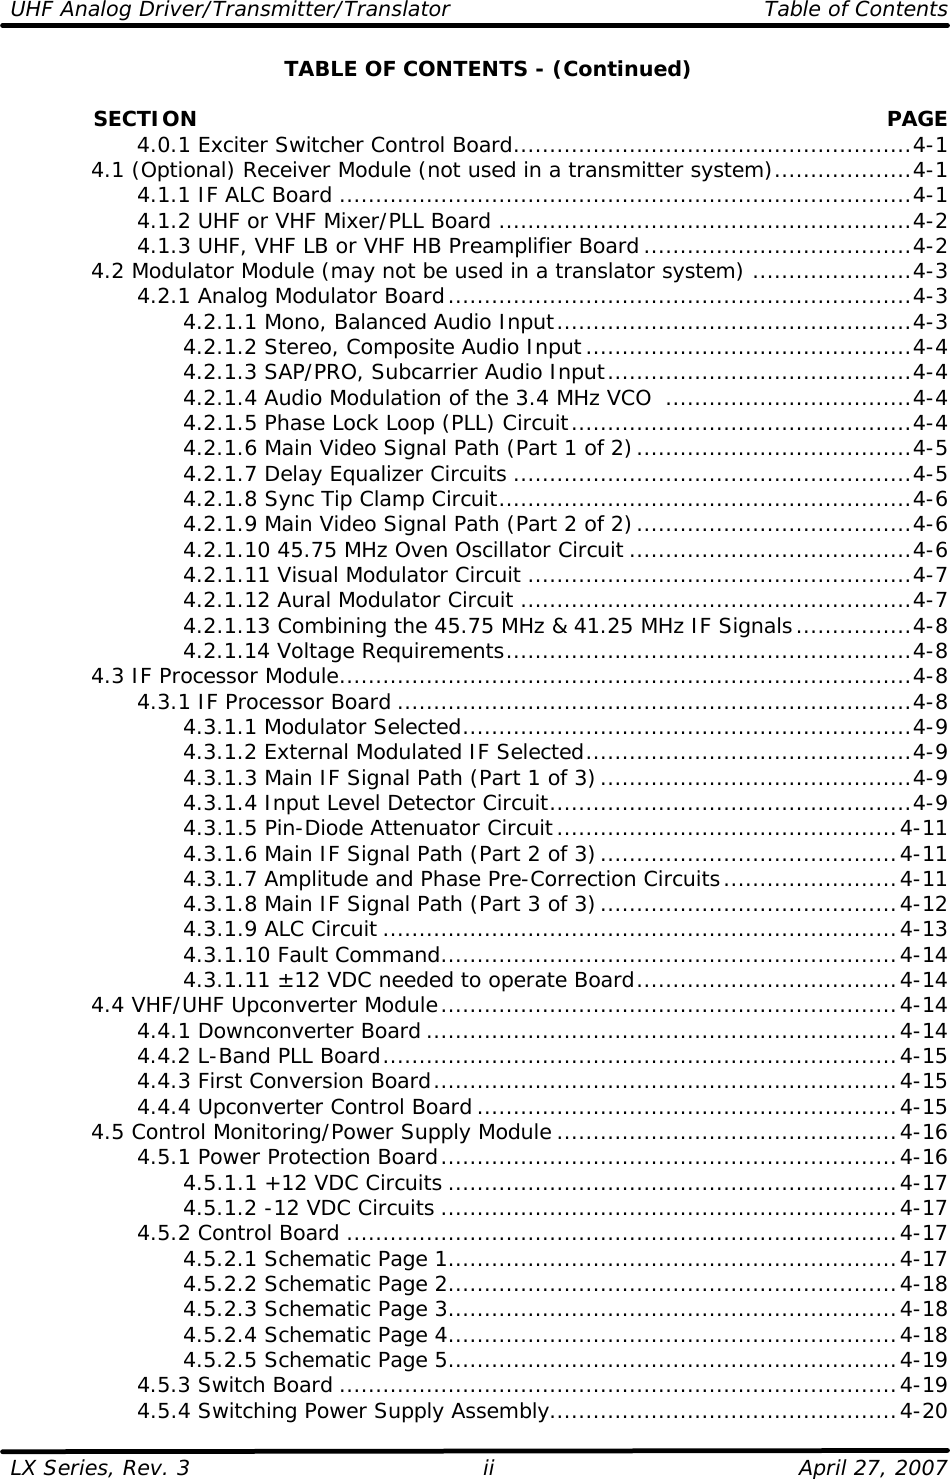 UHF Analog Driver/Transmitter/Translator   Table of Contents  LX Series, Rev. 3    April 27, 2007 iiTABLE OF CONTENTS - (Continued)              SECTION PAGE     4.0.1 Exciter Switcher Control Board.......................................................4-1  4.1 (Optional) Receiver Module (not used in a transmitter system)...................4-1     4.1.1 IF ALC Board ...............................................................................4-1     4.1.2 UHF or VHF Mixer/PLL Board .........................................................4-2     4.1.3 UHF, VHF LB or VHF HB Preamplifier Board.....................................4-2  4.2 Modulator Module (may not be used in a translator system) ......................4-3     4.2.1 Analog Modulator Board................................................................4-3     4.2.1.1 Mono, Balanced Audio Input.................................................4-3     4.2.1.2 Stereo, Composite Audio Input.............................................4-4     4.2.1.3 SAP/PRO, Subcarrier Audio Input..........................................4-4     4.2.1.4 Audio Modulation of the 3.4 MHz VCO  ..................................4-4     4.2.1.5 Phase Lock Loop (PLL) Circuit...............................................4-4     4.2.1.6 Main Video Signal Path (Part 1 of 2)......................................4-5     4.2.1.7 Delay Equalizer Circuits .......................................................4-5     4.2.1.8 Sync Tip Clamp Circuit.........................................................4-6     4.2.1.9 Main Video Signal Path (Part 2 of 2)......................................4-6     4.2.1.10 45.75 MHz Oven Oscillator Circuit .......................................4-6     4.2.1.11 Visual Modulator Circuit .....................................................4-7     4.2.1.12 Aural Modulator Circuit ......................................................4-7     4.2.1.13 Combining the 45.75 MHz &amp; 41.25 MHz IF Signals................4-8     4.2.1.14 Voltage Requirements........................................................4-8  4.3 IF Processor Module...............................................................................4-8     4.3.1 IF Processor Board .......................................................................4-8     4.3.1.1 Modulator Selected..............................................................4-9     4.3.1.2 External Modulated IF Selected.............................................4-9     4.3.1.3 Main IF Signal Path (Part 1 of 3)...........................................4-9     4.3.1.4 Input Level Detector Circuit..................................................4-9     4.3.1.5 Pin-Diode Attenuator Circuit...............................................4-11     4.3.1.6 Main IF Signal Path (Part 2 of 3).........................................4-11     4.3.1.7 Amplitude and Phase Pre-Correction Circuits........................4-11     4.3.1.8 Main IF Signal Path (Part 3 of 3).........................................4-12     4.3.1.9 ALC Circuit .......................................................................4-13     4.3.1.10 Fault Command...............................................................4-14     4.3.1.11 ±12 VDC needed to operate Board....................................4-14  4.4 VHF/UHF Upconverter Module...............................................................4-14     4.4.1 Downconverter Board .................................................................4-14     4.4.2 L-Band PLL Board.......................................................................4-15     4.4.3 First Conversion Board................................................................4-15     4.4.4 Upconverter Control Board ..........................................................4-15  4.5 Control Monitoring/Power Supply Module ...............................................4-16     4.5.1 Power Protection Board...............................................................4-16     4.5.1.1 +12 VDC Circuits ..............................................................4-17     4.5.1.2 -12 VDC Circuits ...............................................................4-17     4.5.2 Control Board ............................................................................4-17     4.5.2.1 Schematic Page 1..............................................................4-17     4.5.2.2 Schematic Page 2..............................................................4-18     4.5.2.3 Schematic Page 3..............................................................4-18     4.5.2.4 Schematic Page 4..............................................................4-18     4.5.2.5 Schematic Page 5..............................................................4-19     4.5.3 Switch Board .............................................................................4-19     4.5.4 Switching Power Supply Assembly................................................4-20 